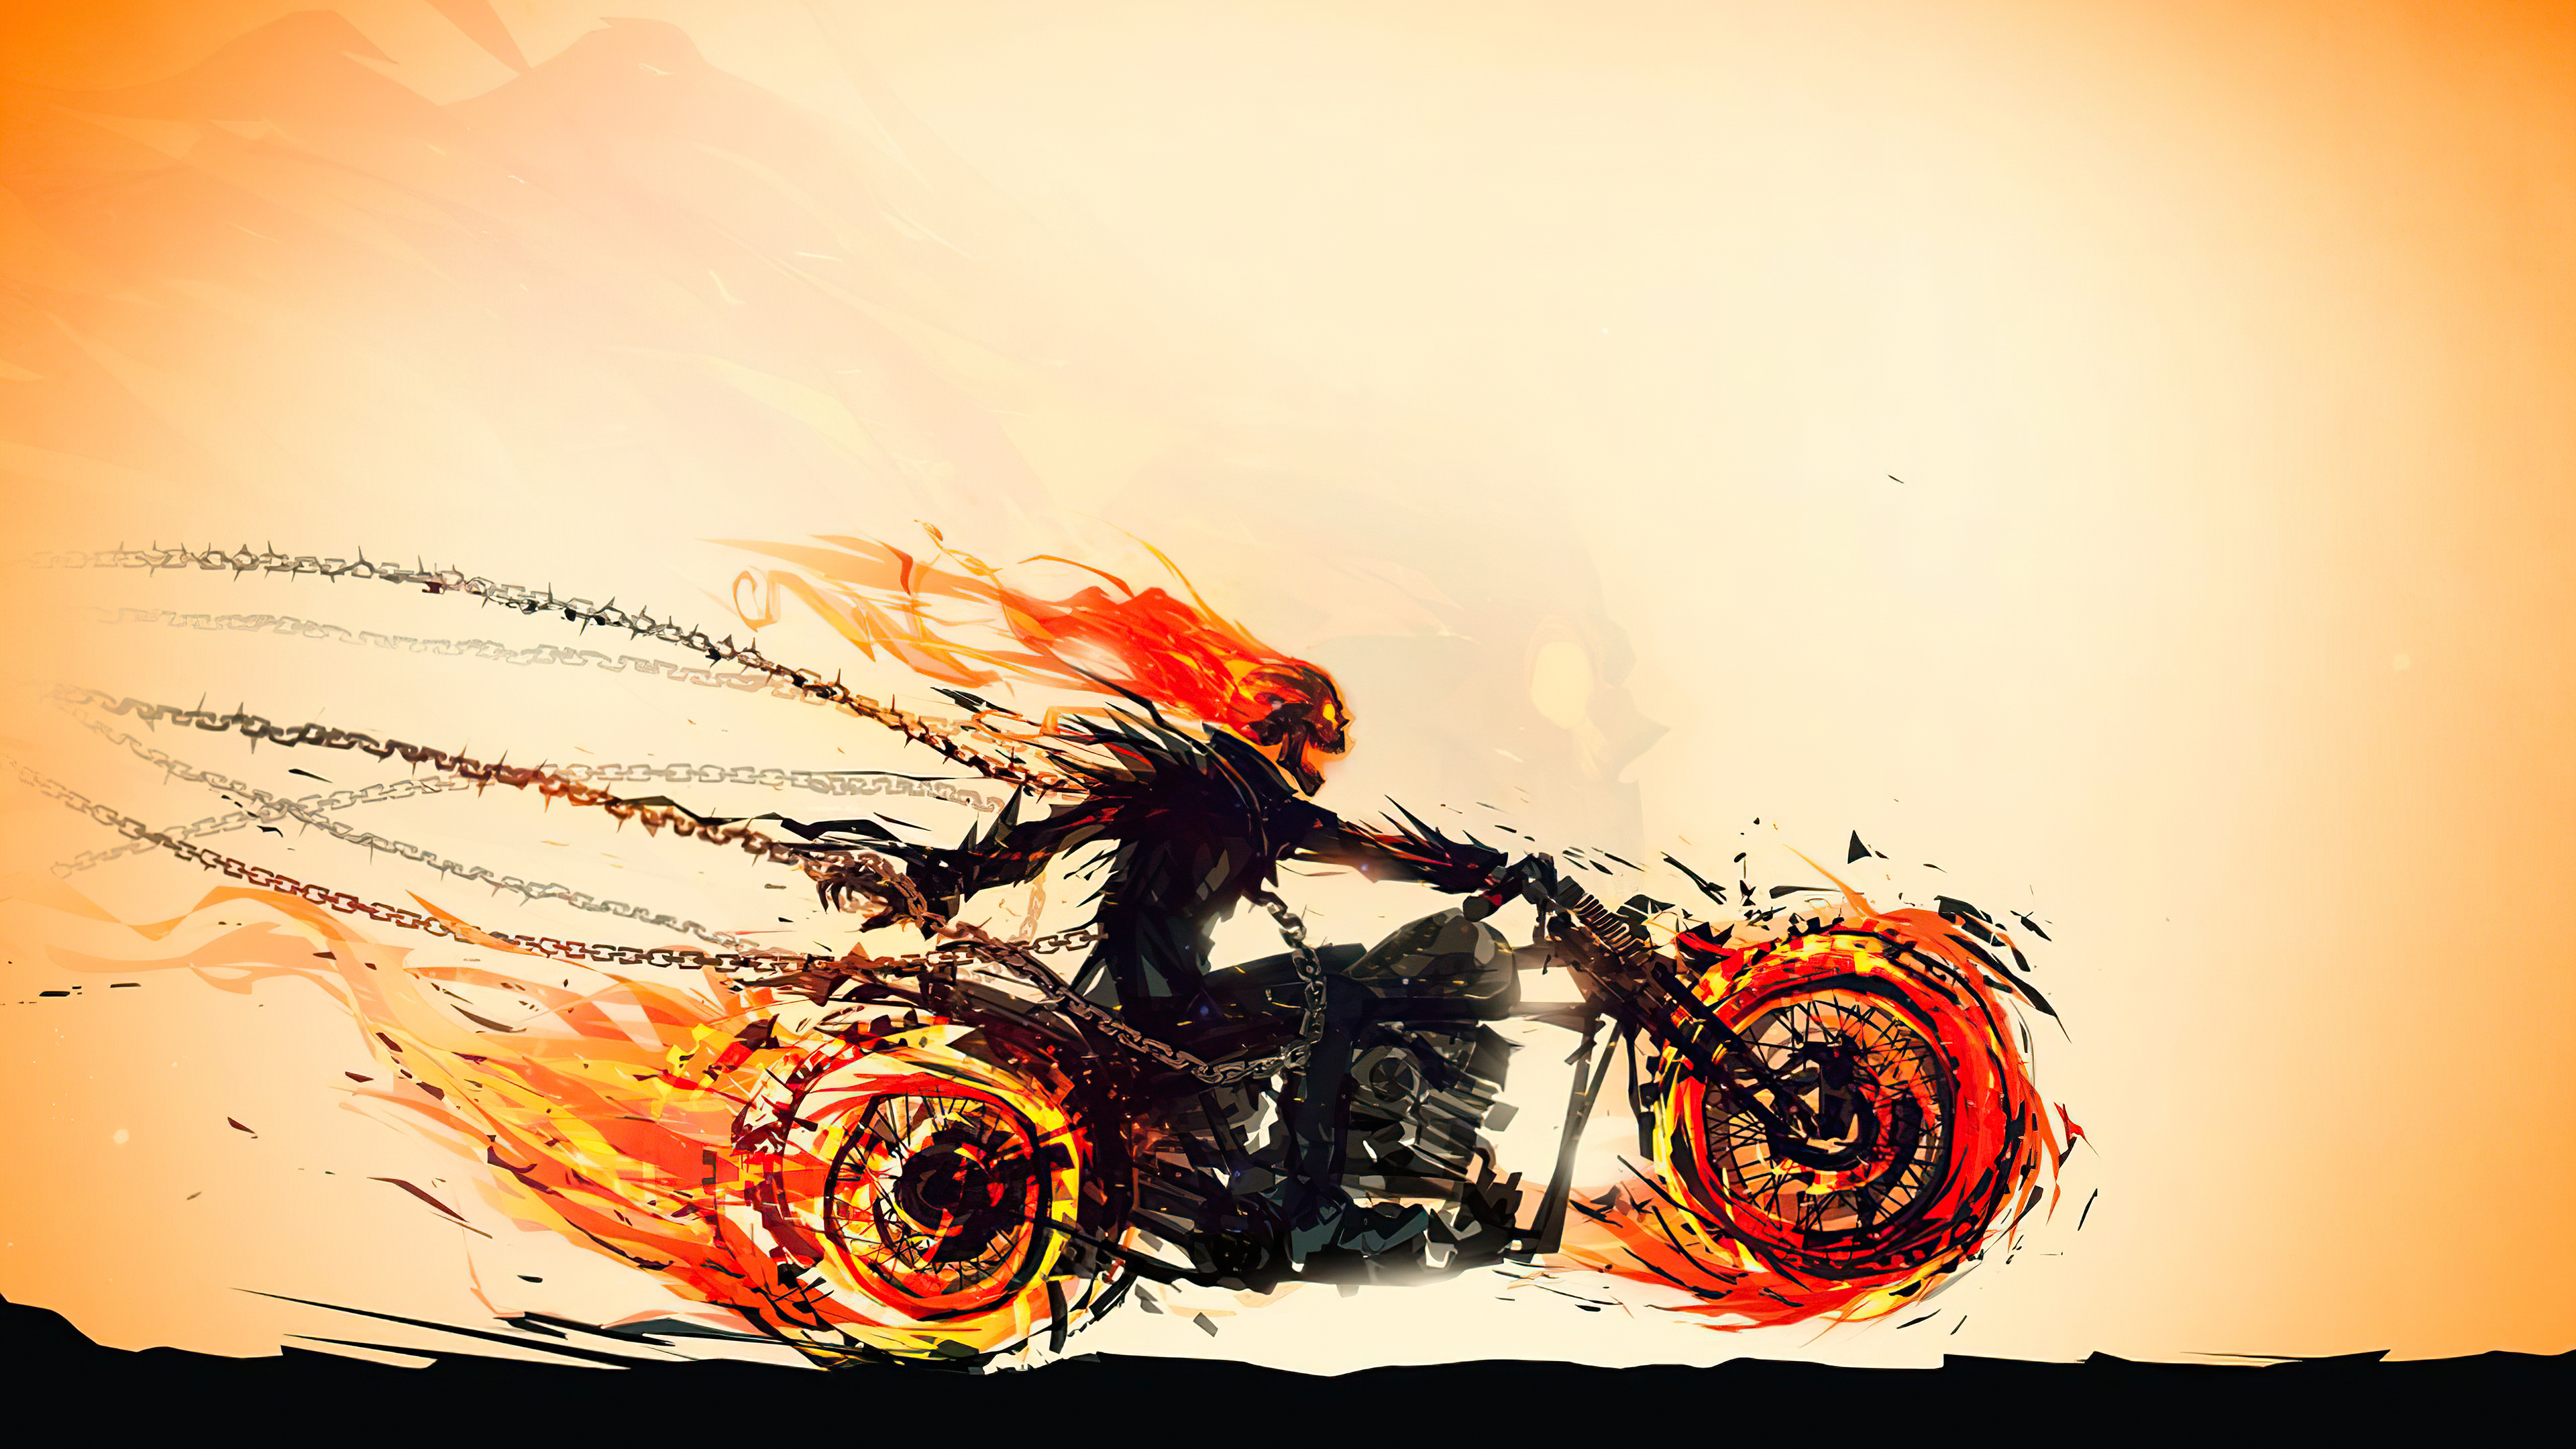 4K ghost rider wallpapers Wallpapers - 4k Wallpapers + ipad wallpapers  4k - 4k wallpaper Pc